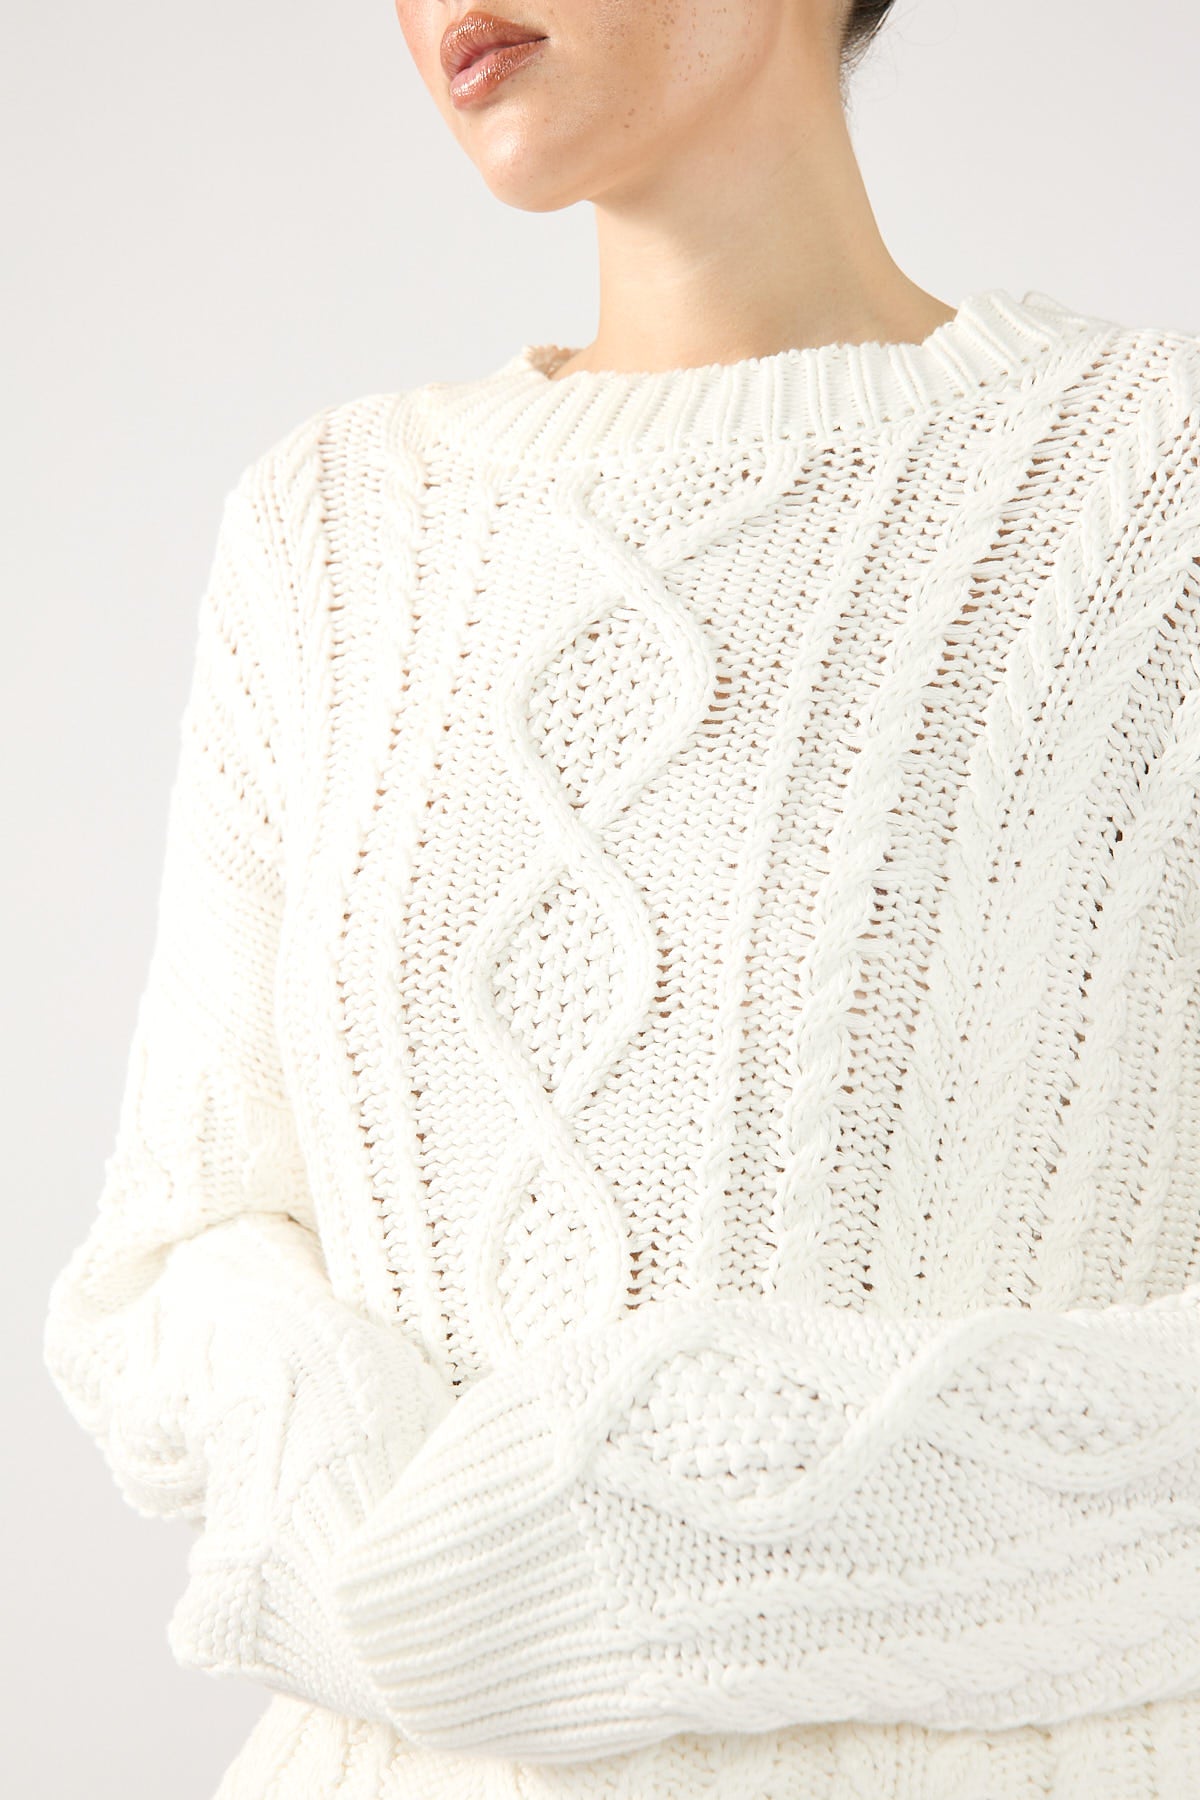 Perfect Stranger Jessna Oversized Cable Knit Cream